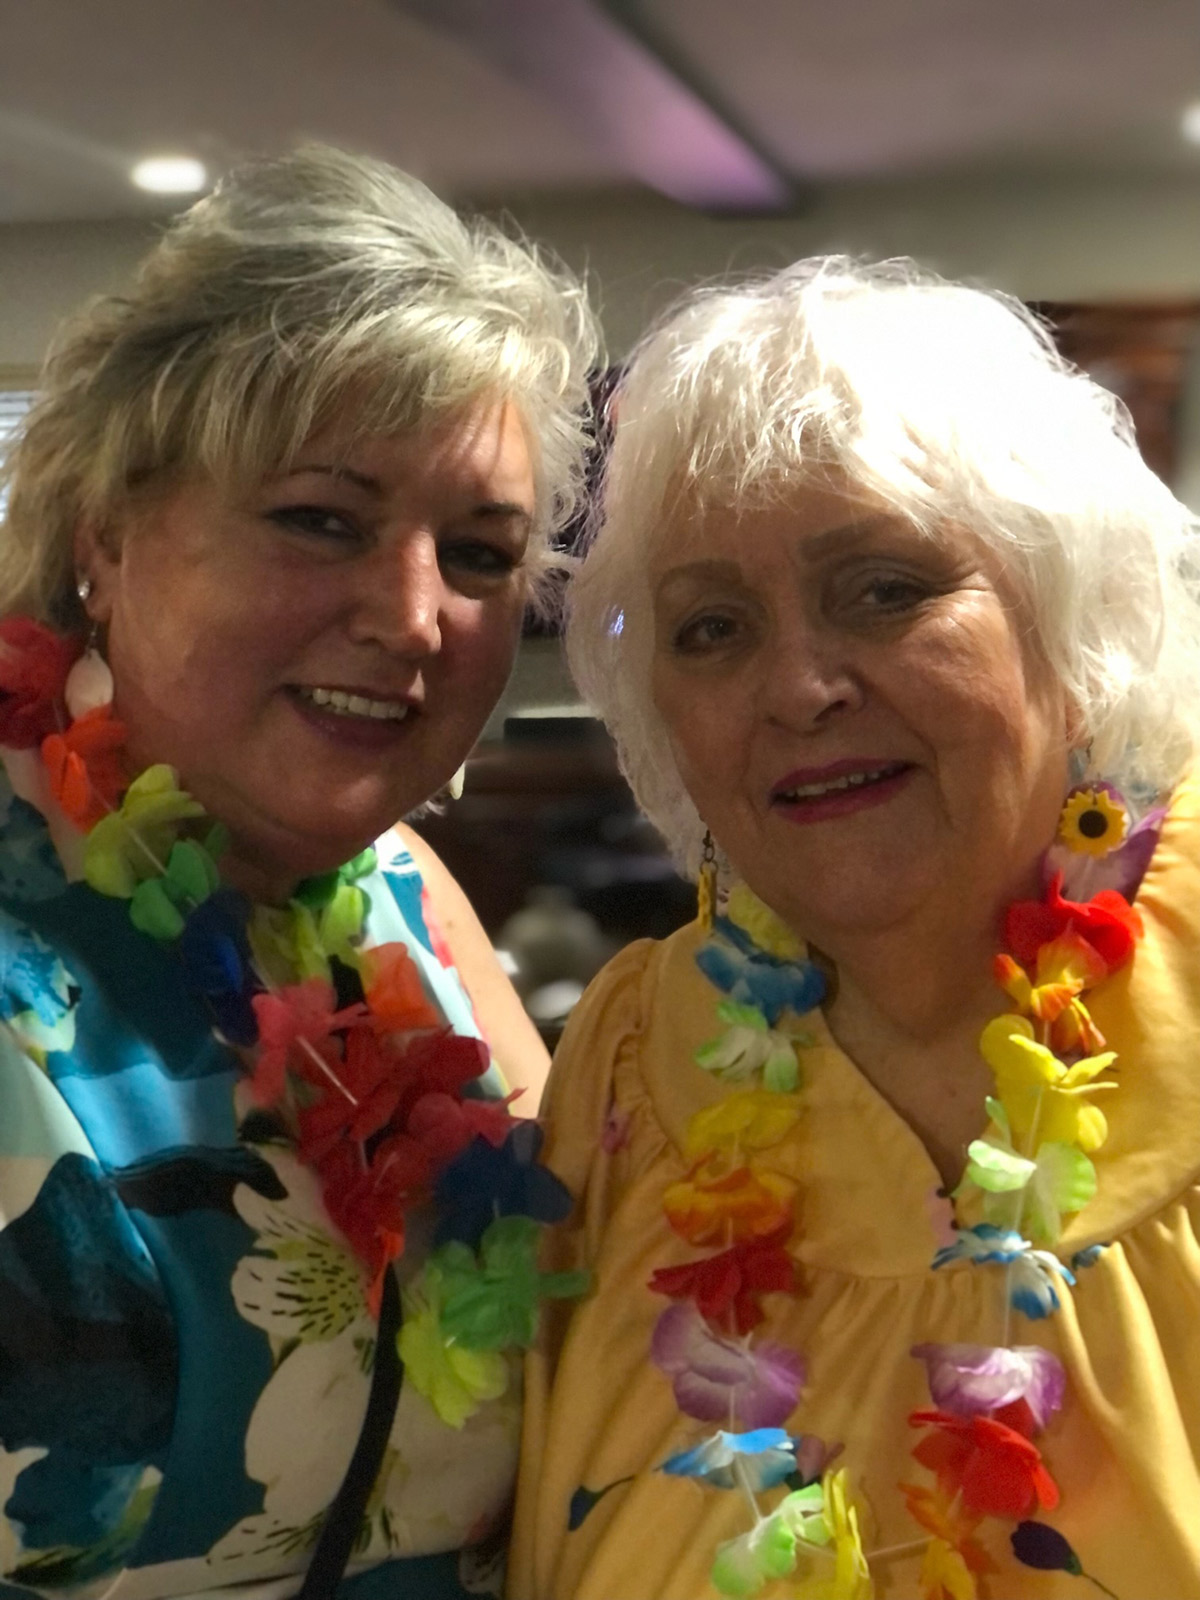 Normandy Park residents smiling, wearing leis